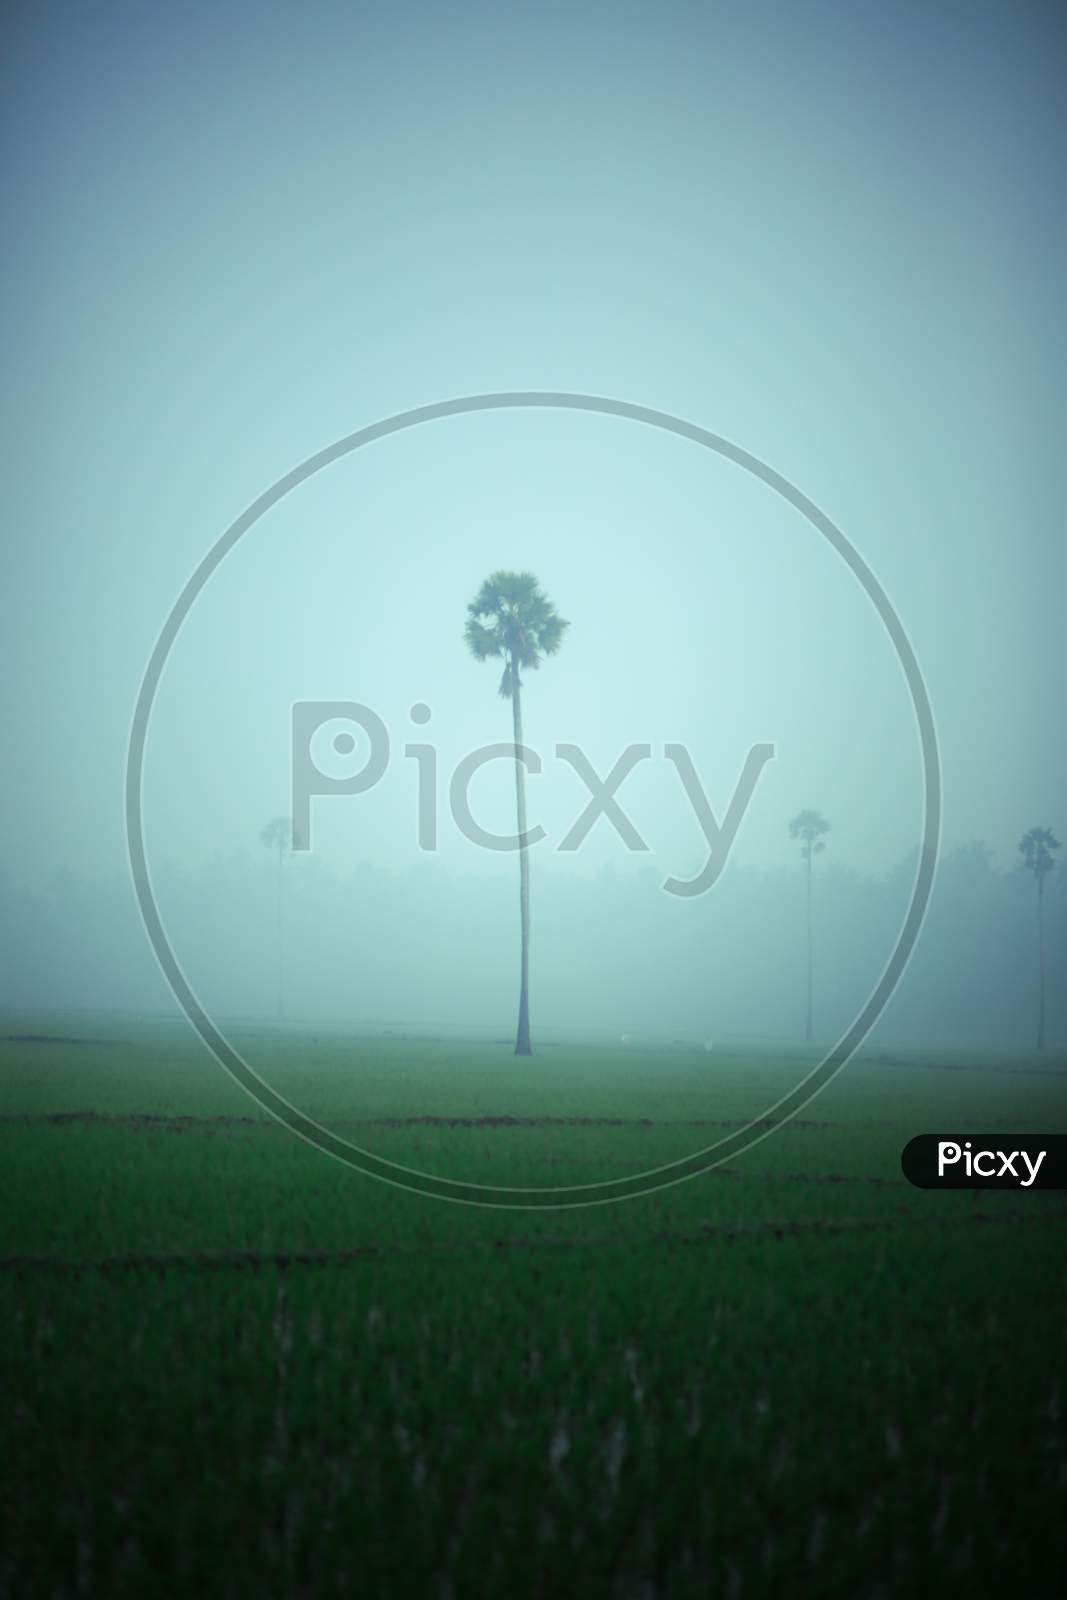 View of a palm tree covered in fog